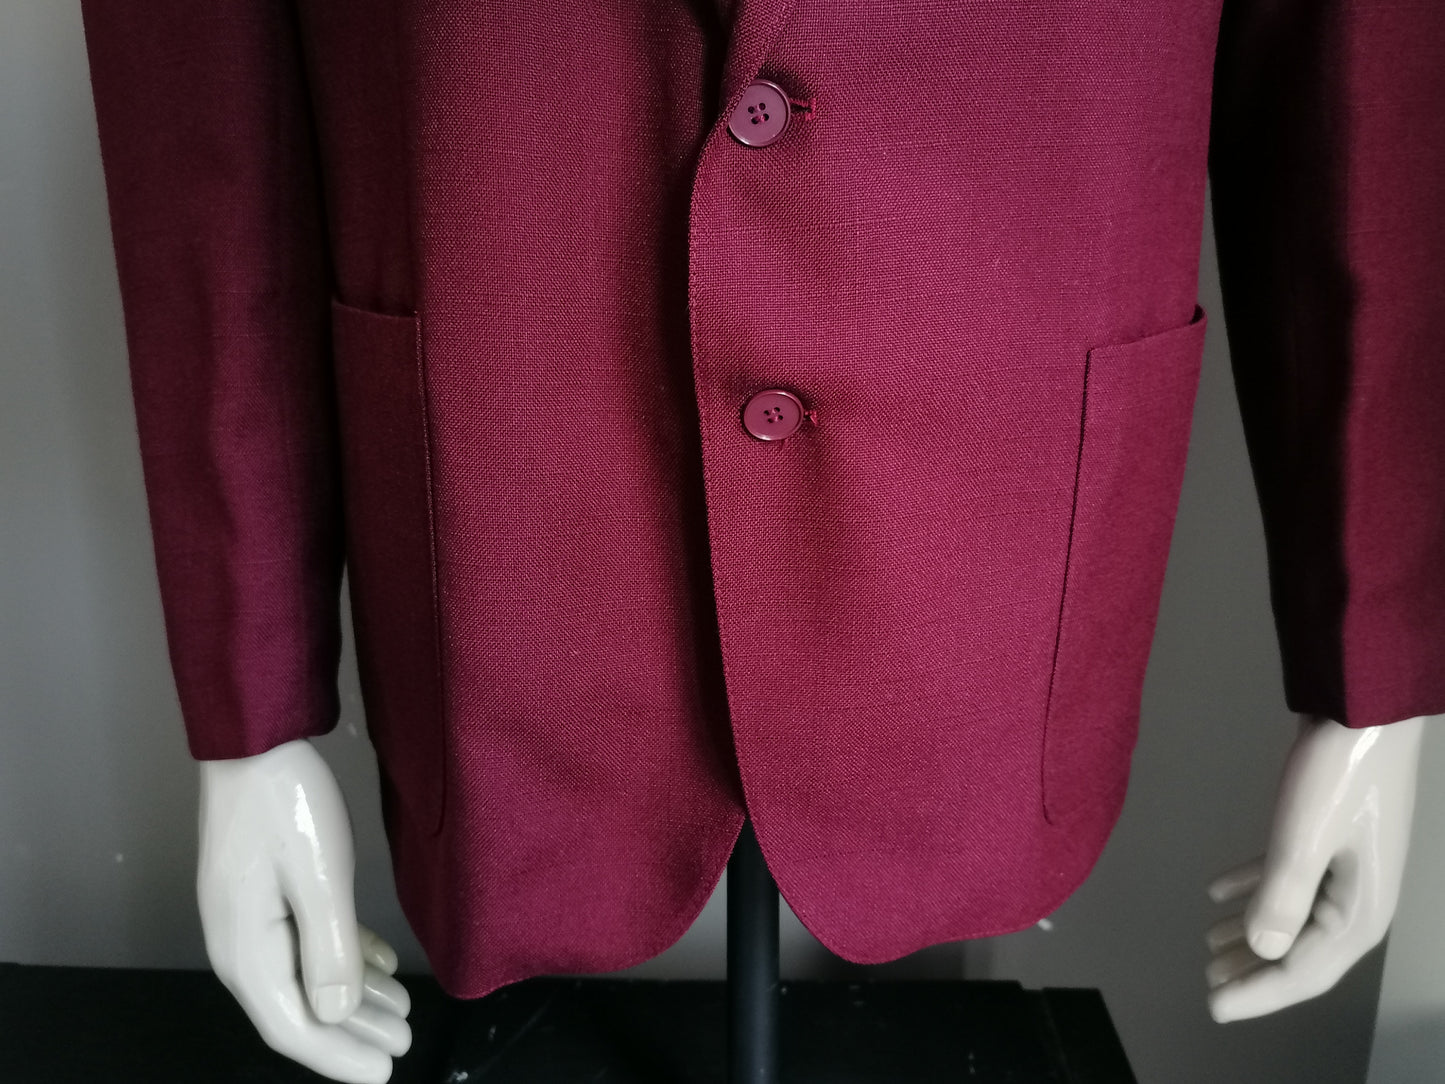 Guiseppe Marlone jacket. Dark red / bordeaux colored. Size 52 / L.